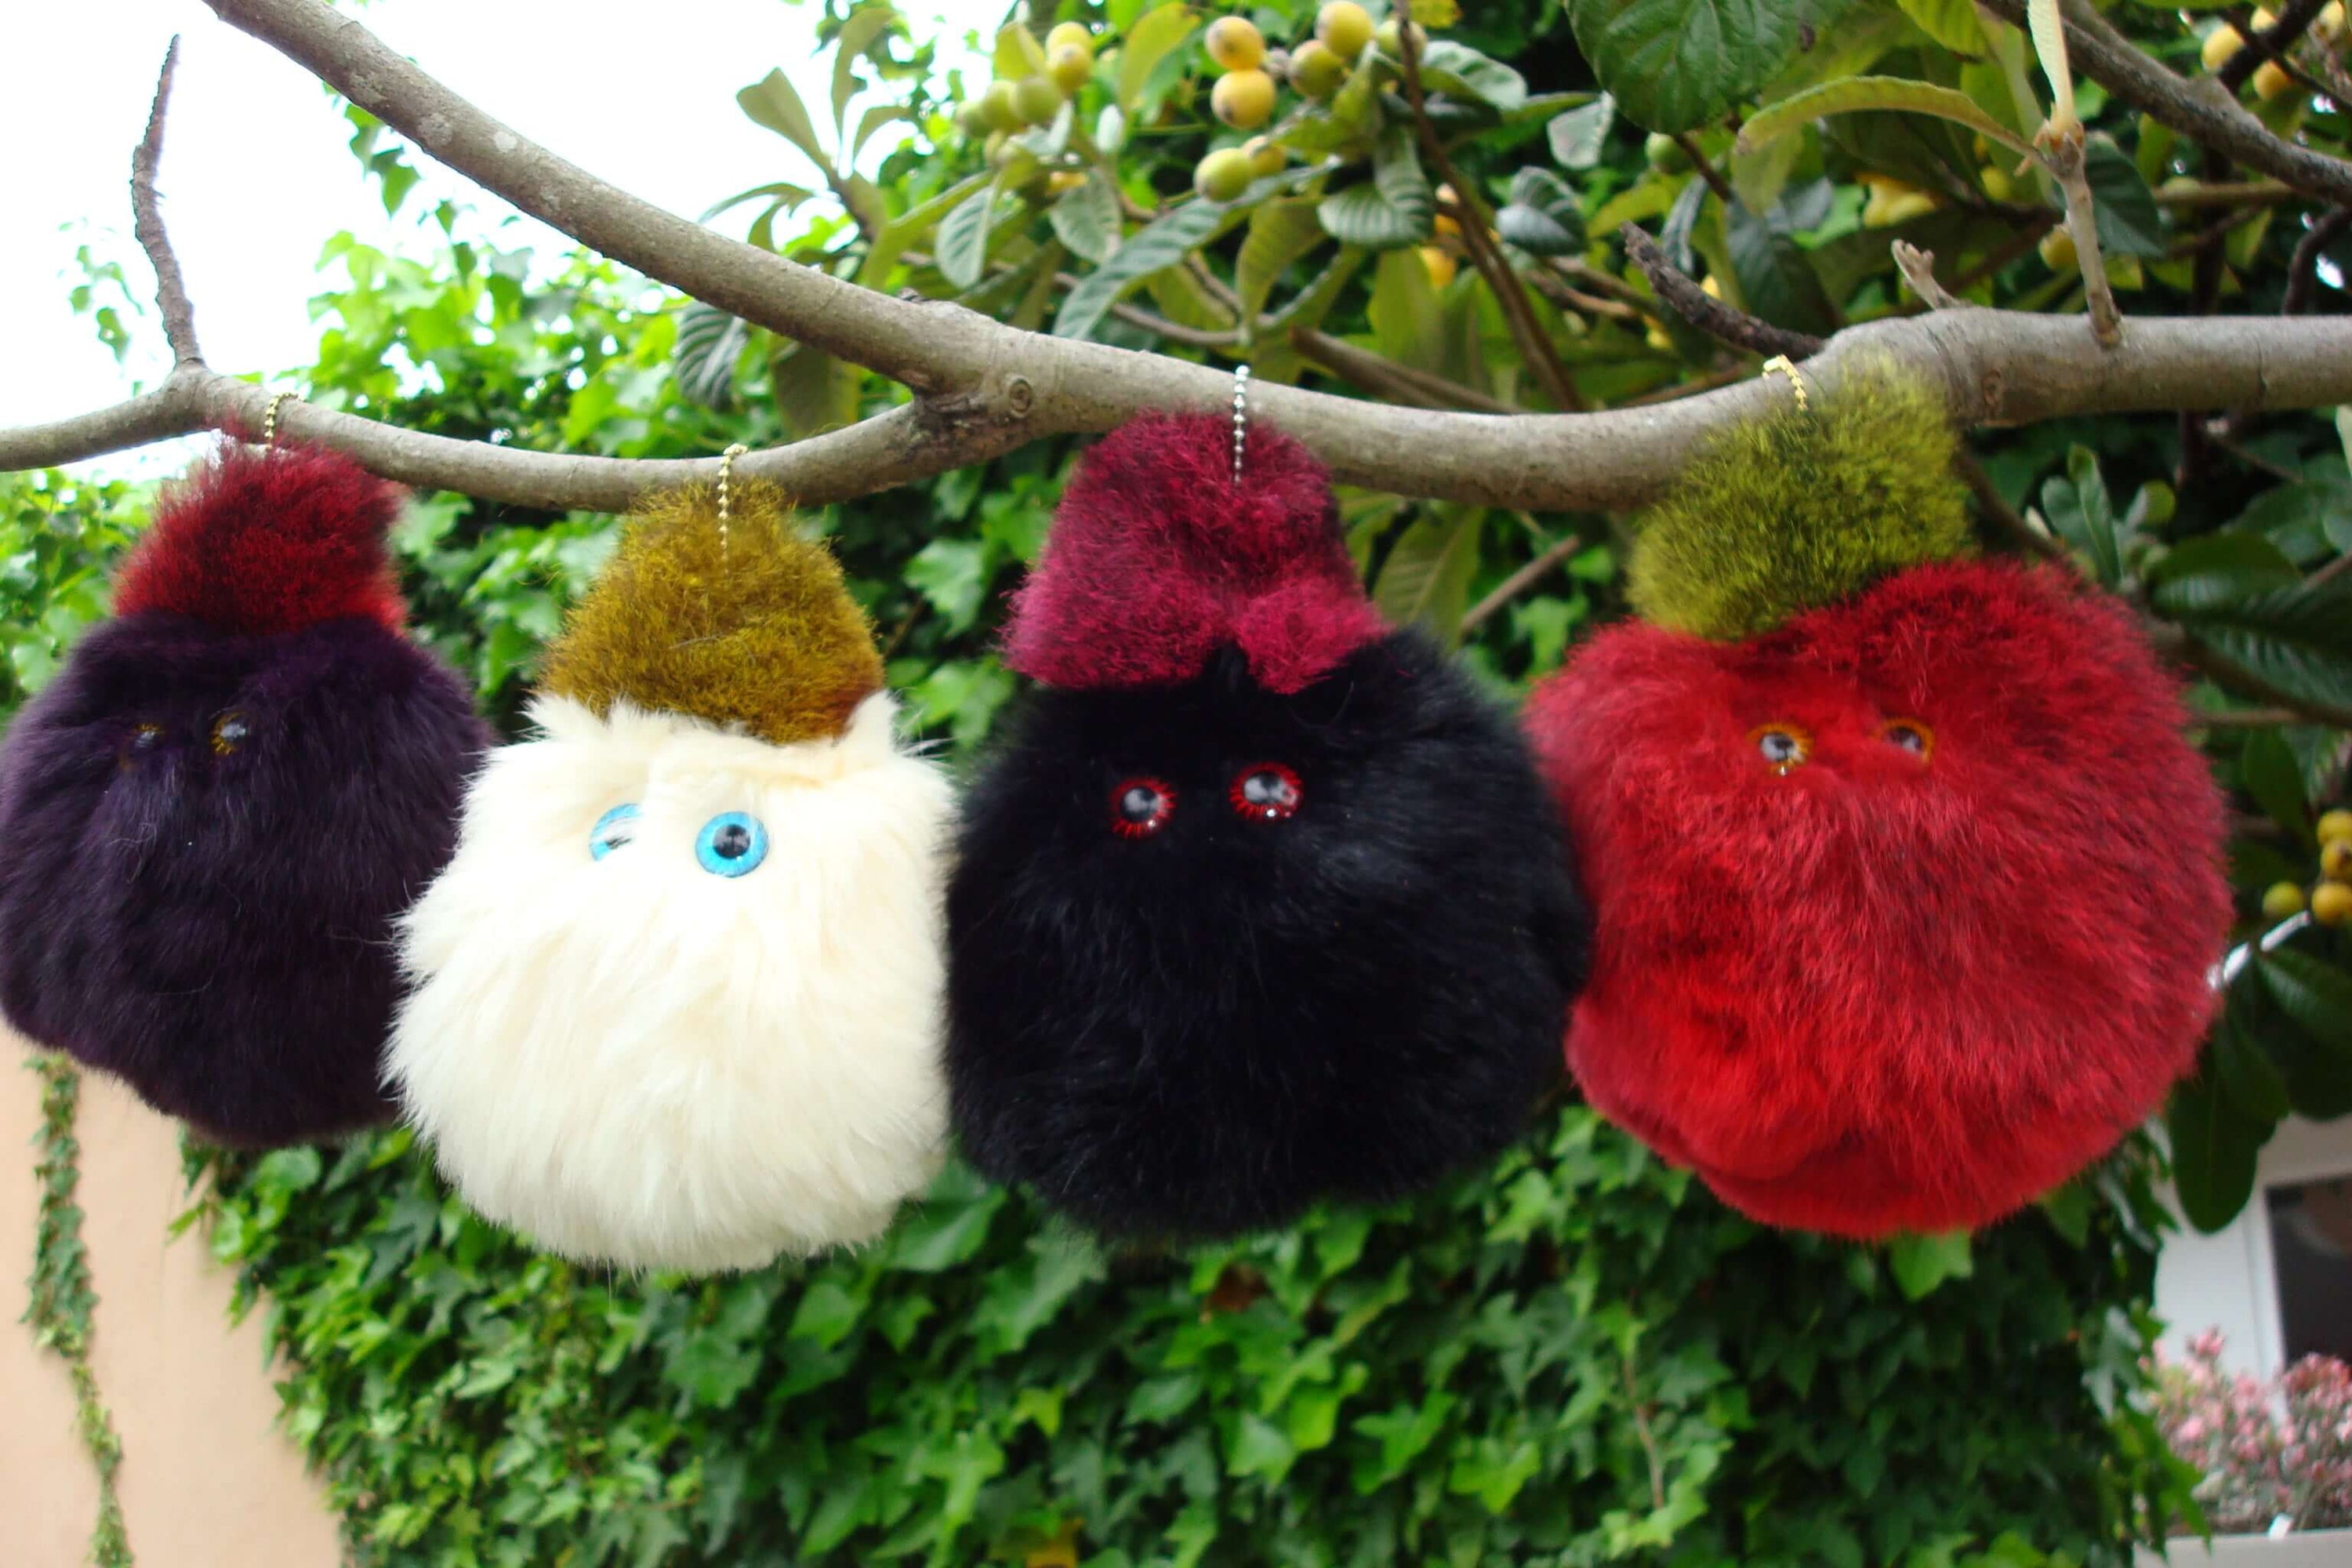 Possum fur ball toy for kids that squeaks when squeezed to hang on tree, car aerial or schoolbag